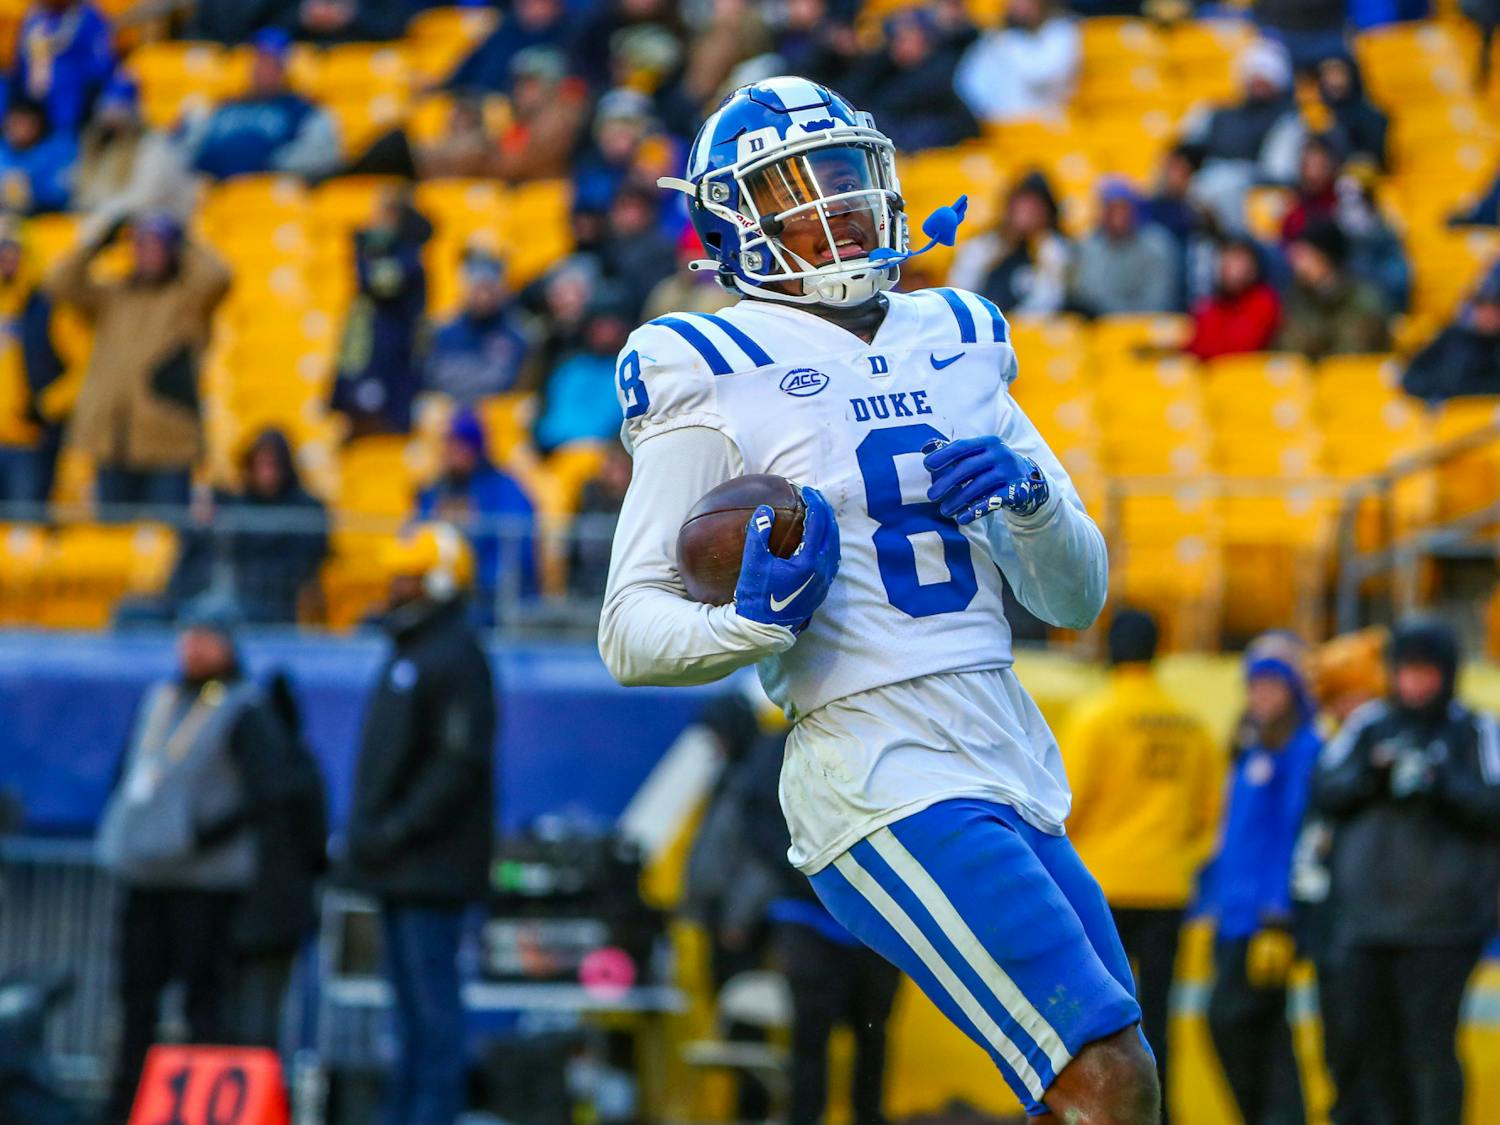 Jordan Moore put up career numbers Saturday with 14 catches for 199 yards in Duke's 28-26 loss.